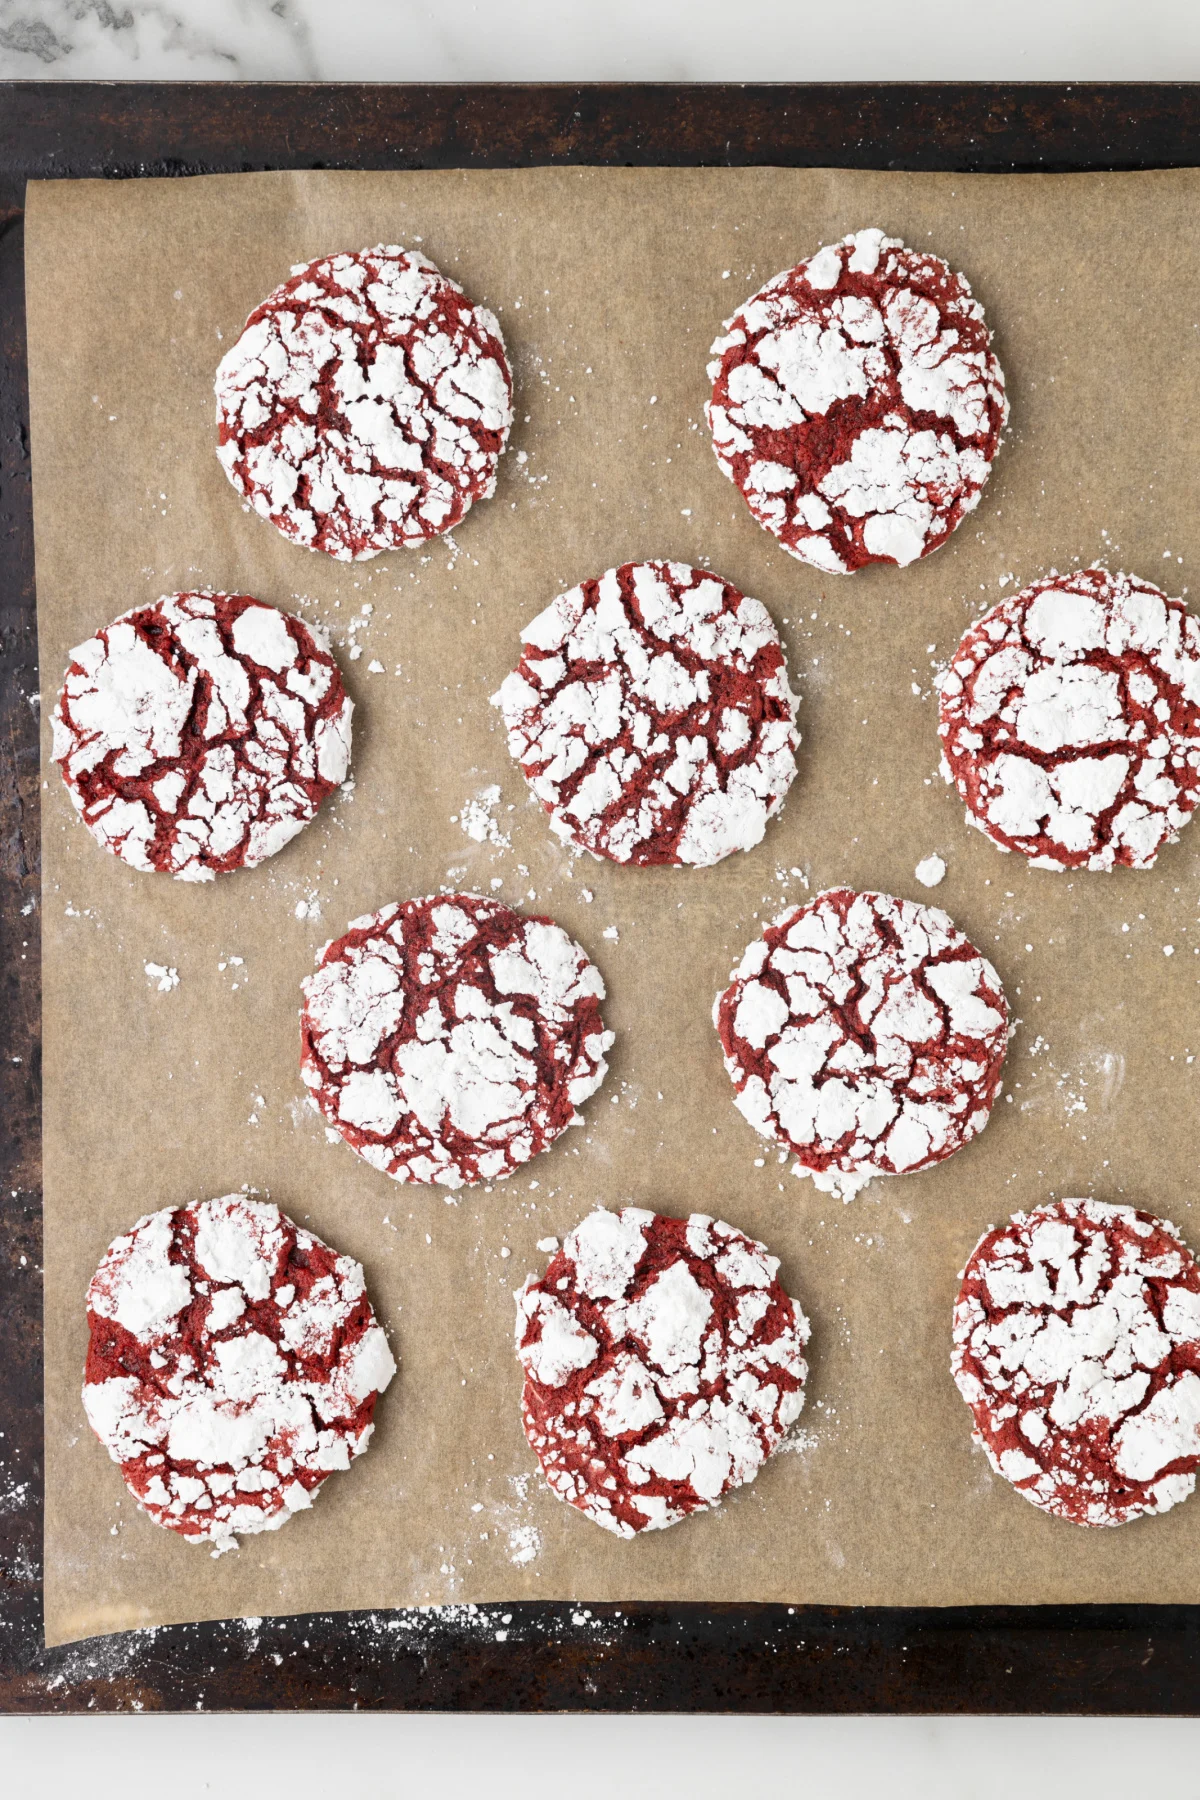 red velvet cool whip cookies on a baking sheet